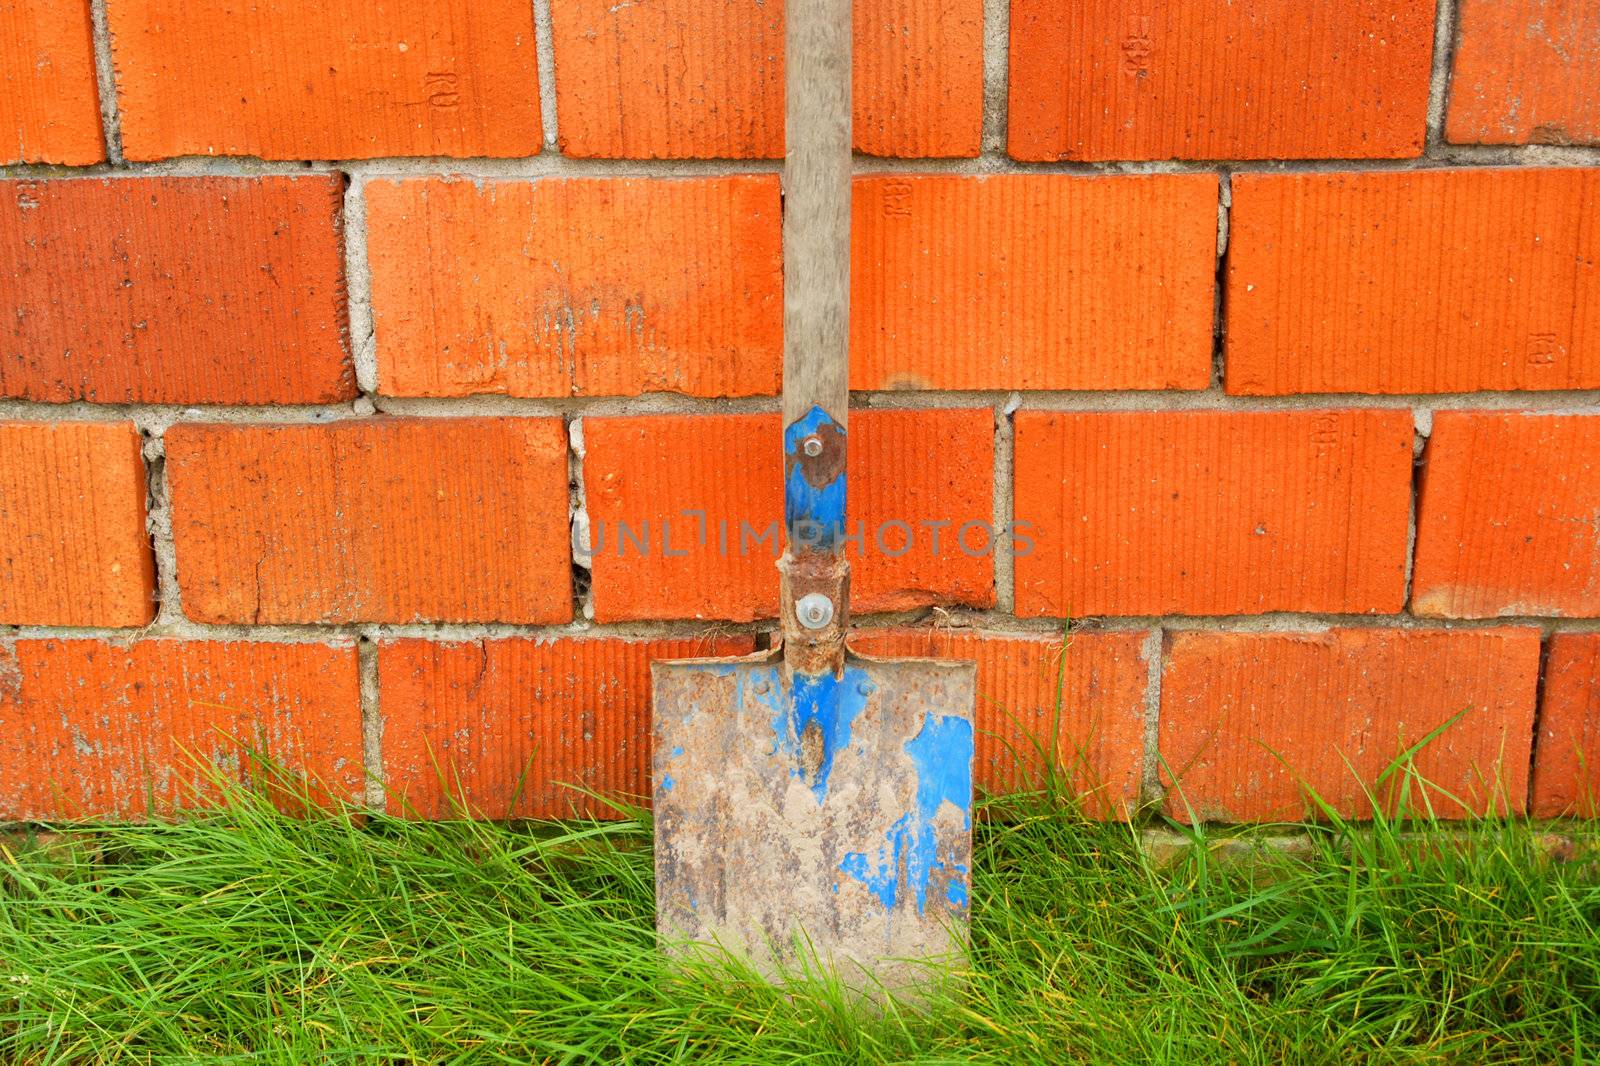 Spade on the red brick wall background